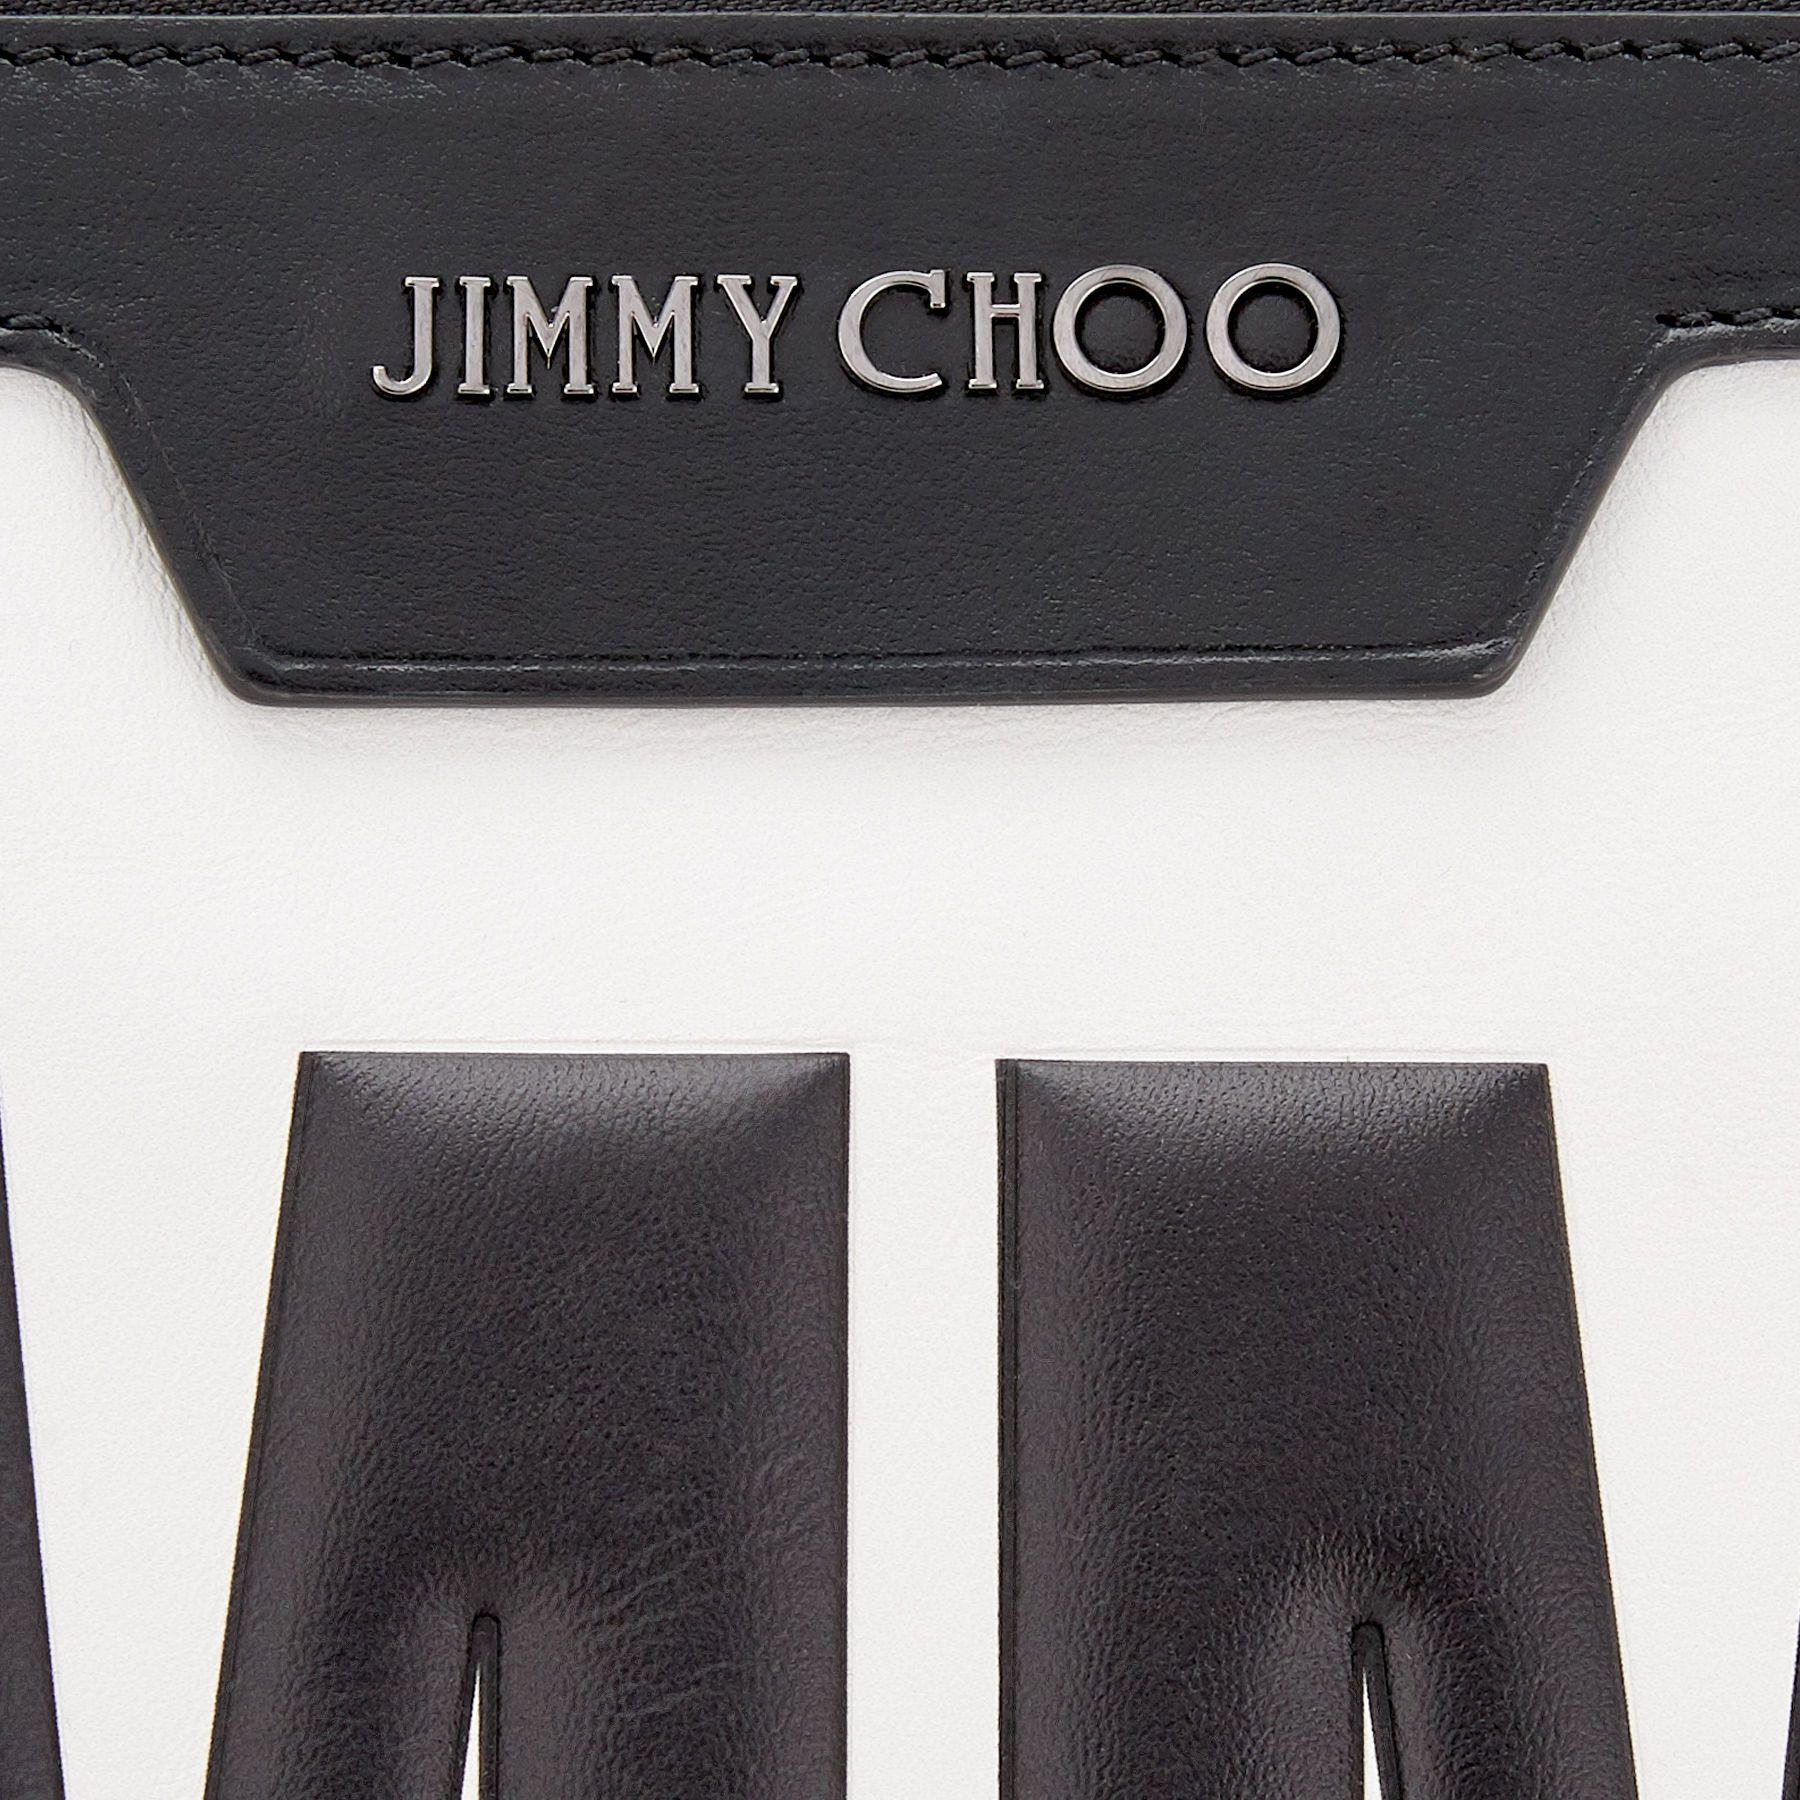 Jimmy Choo Logo - Black and White Bicolour Leather Document Holder with Embossed Jimmy ...